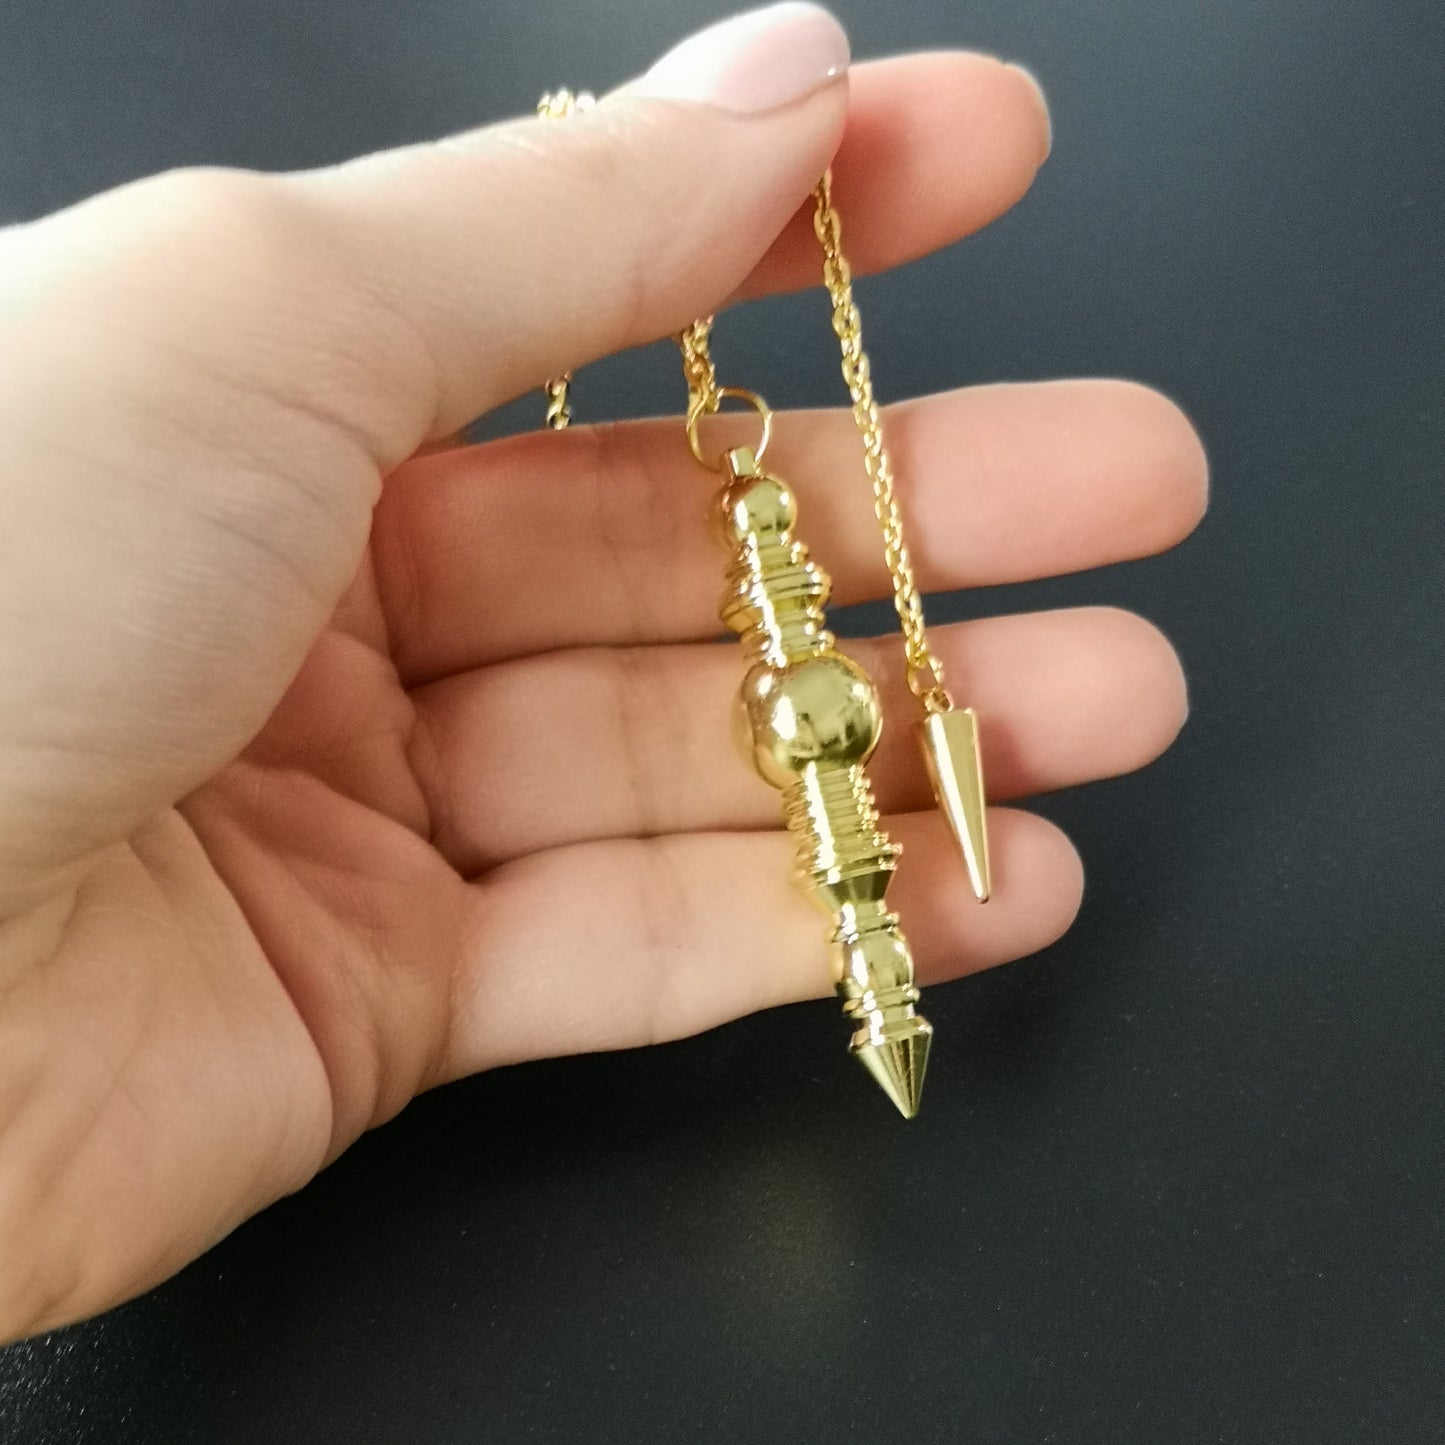 Golden long double Isis style dowsing pendulum - The French Witch shop